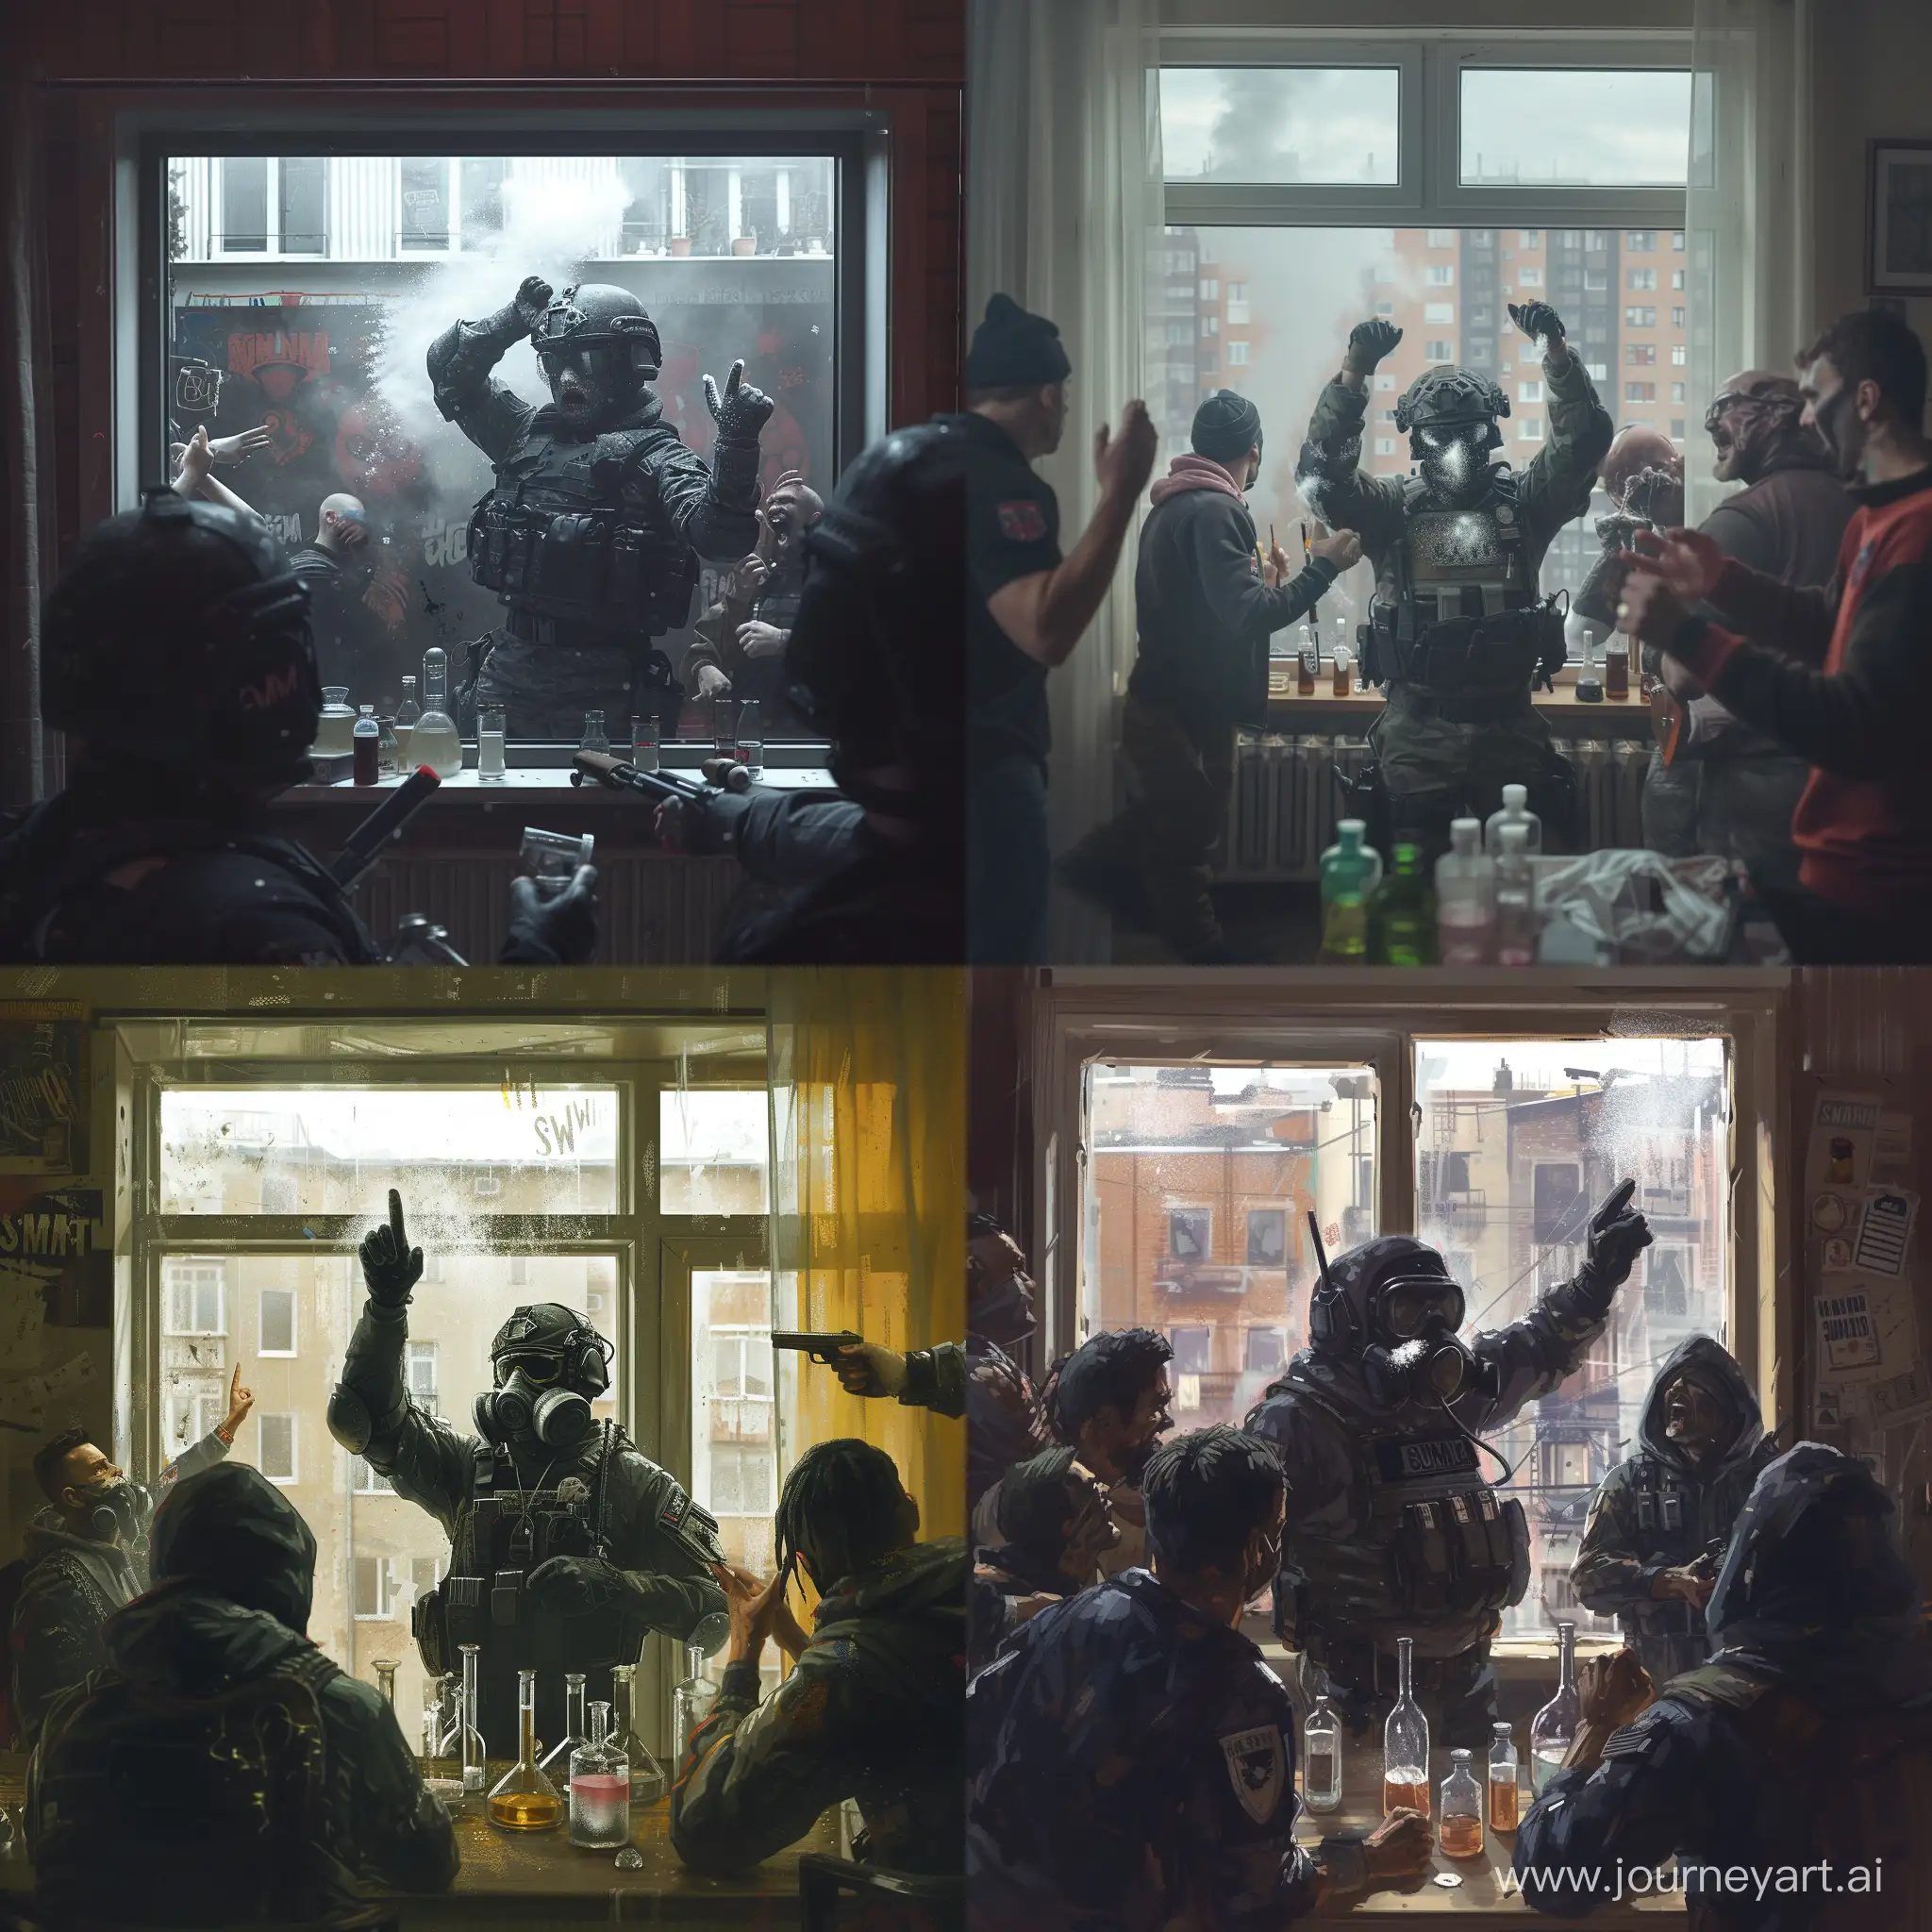 Undercover-SWAT-Officer-Celebrates-with-Gang-in-Secret-Lab